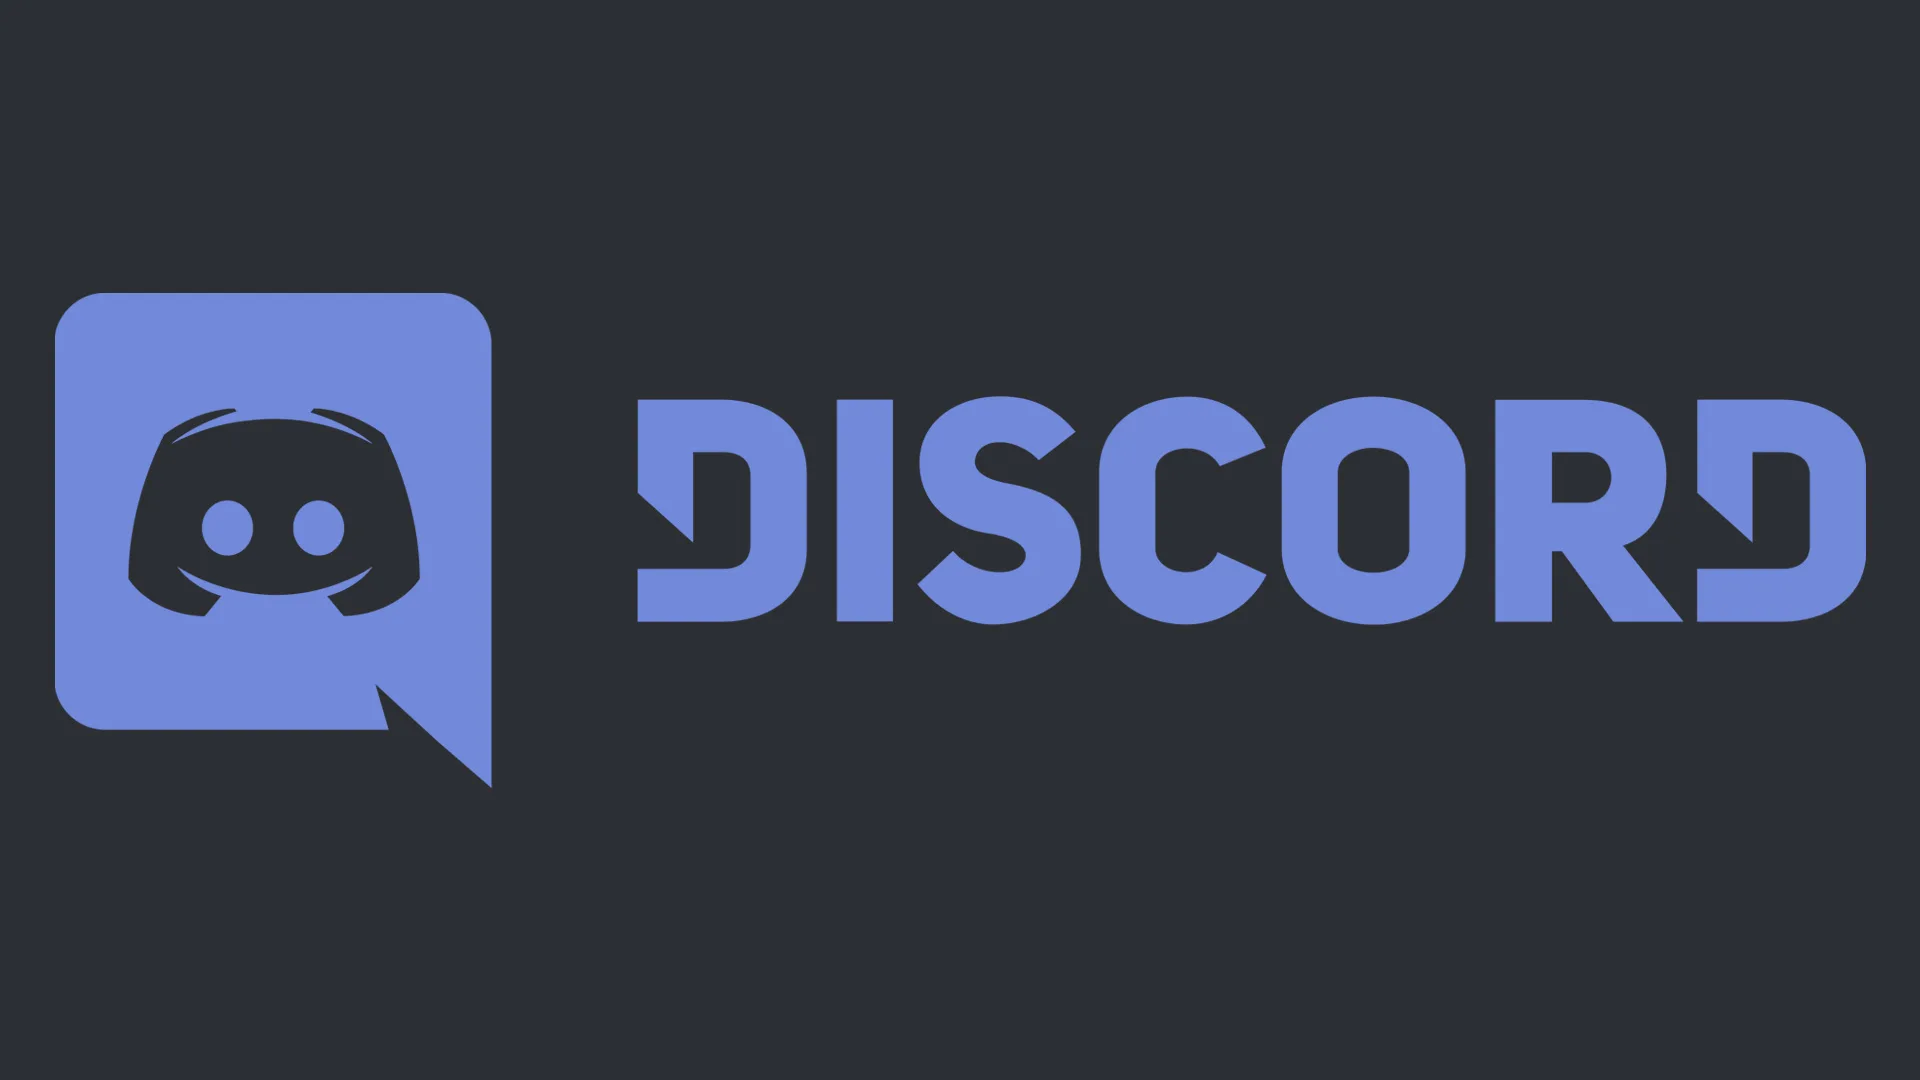 Bringing developers, translators, and users together with Discord cover art